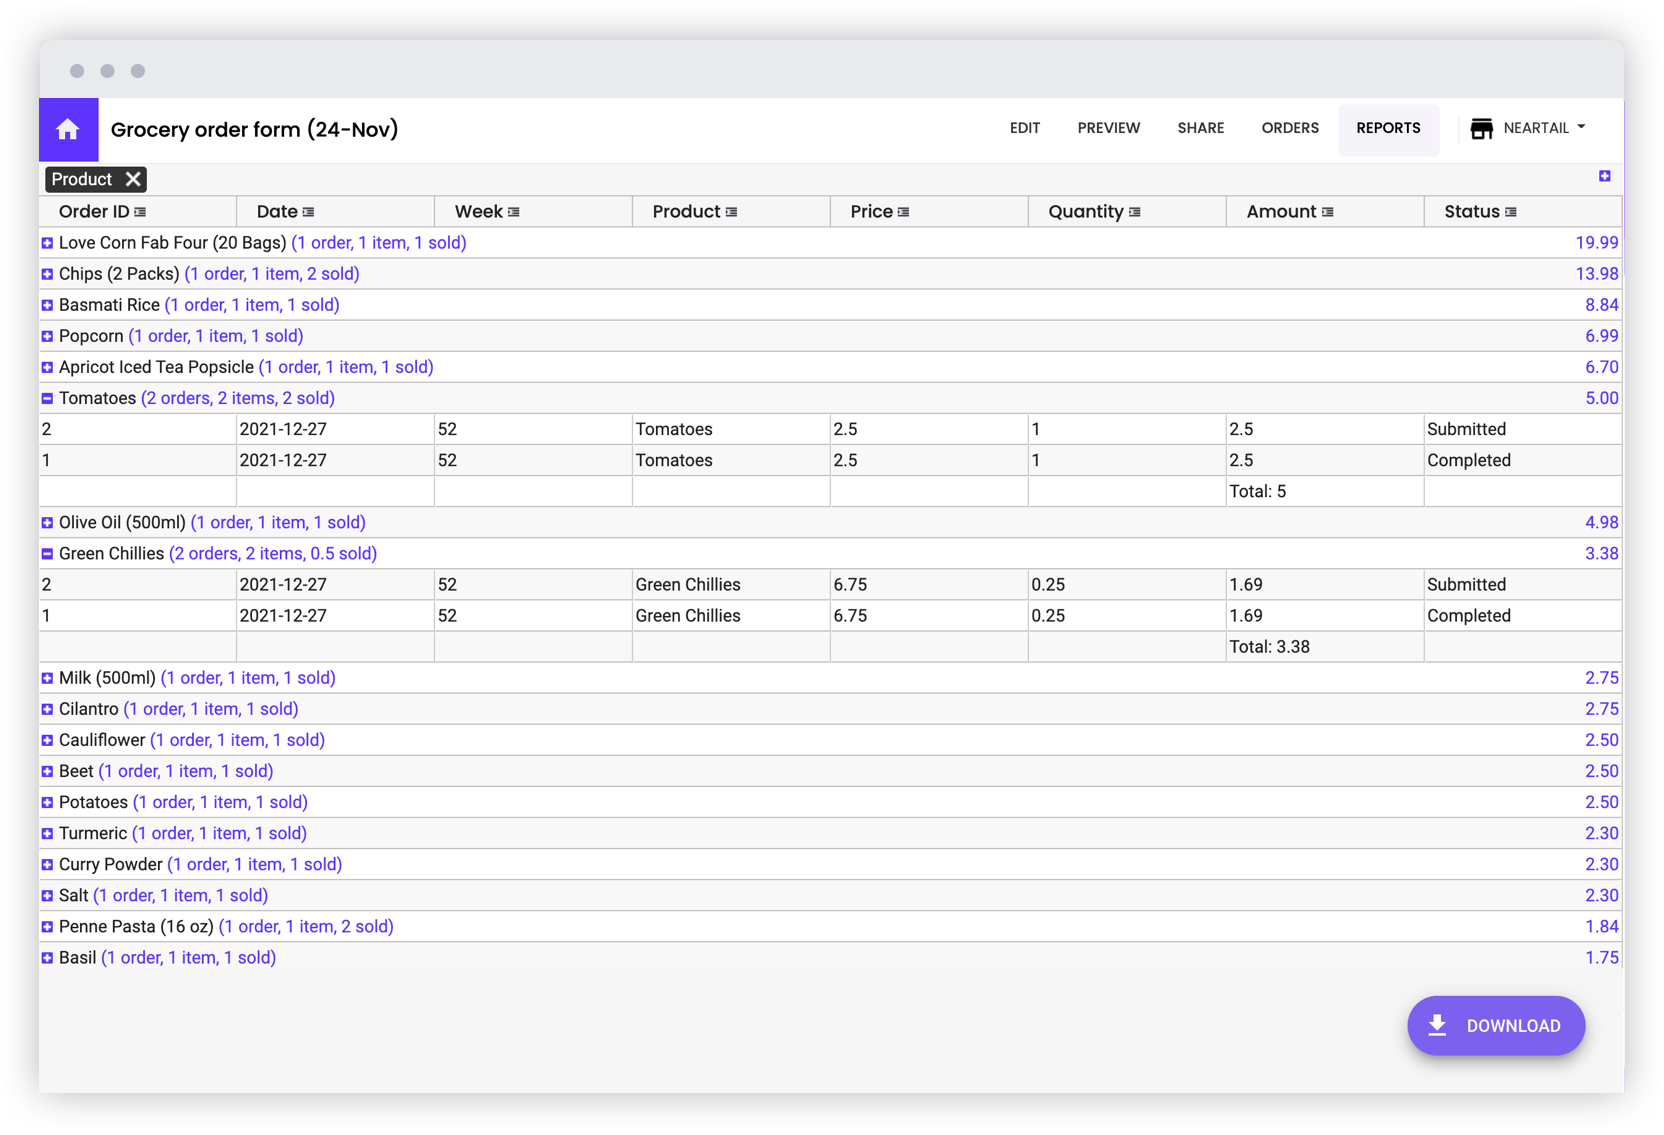 Generate reports to view sales, orders and quantity sold by product, customer, location, week & more